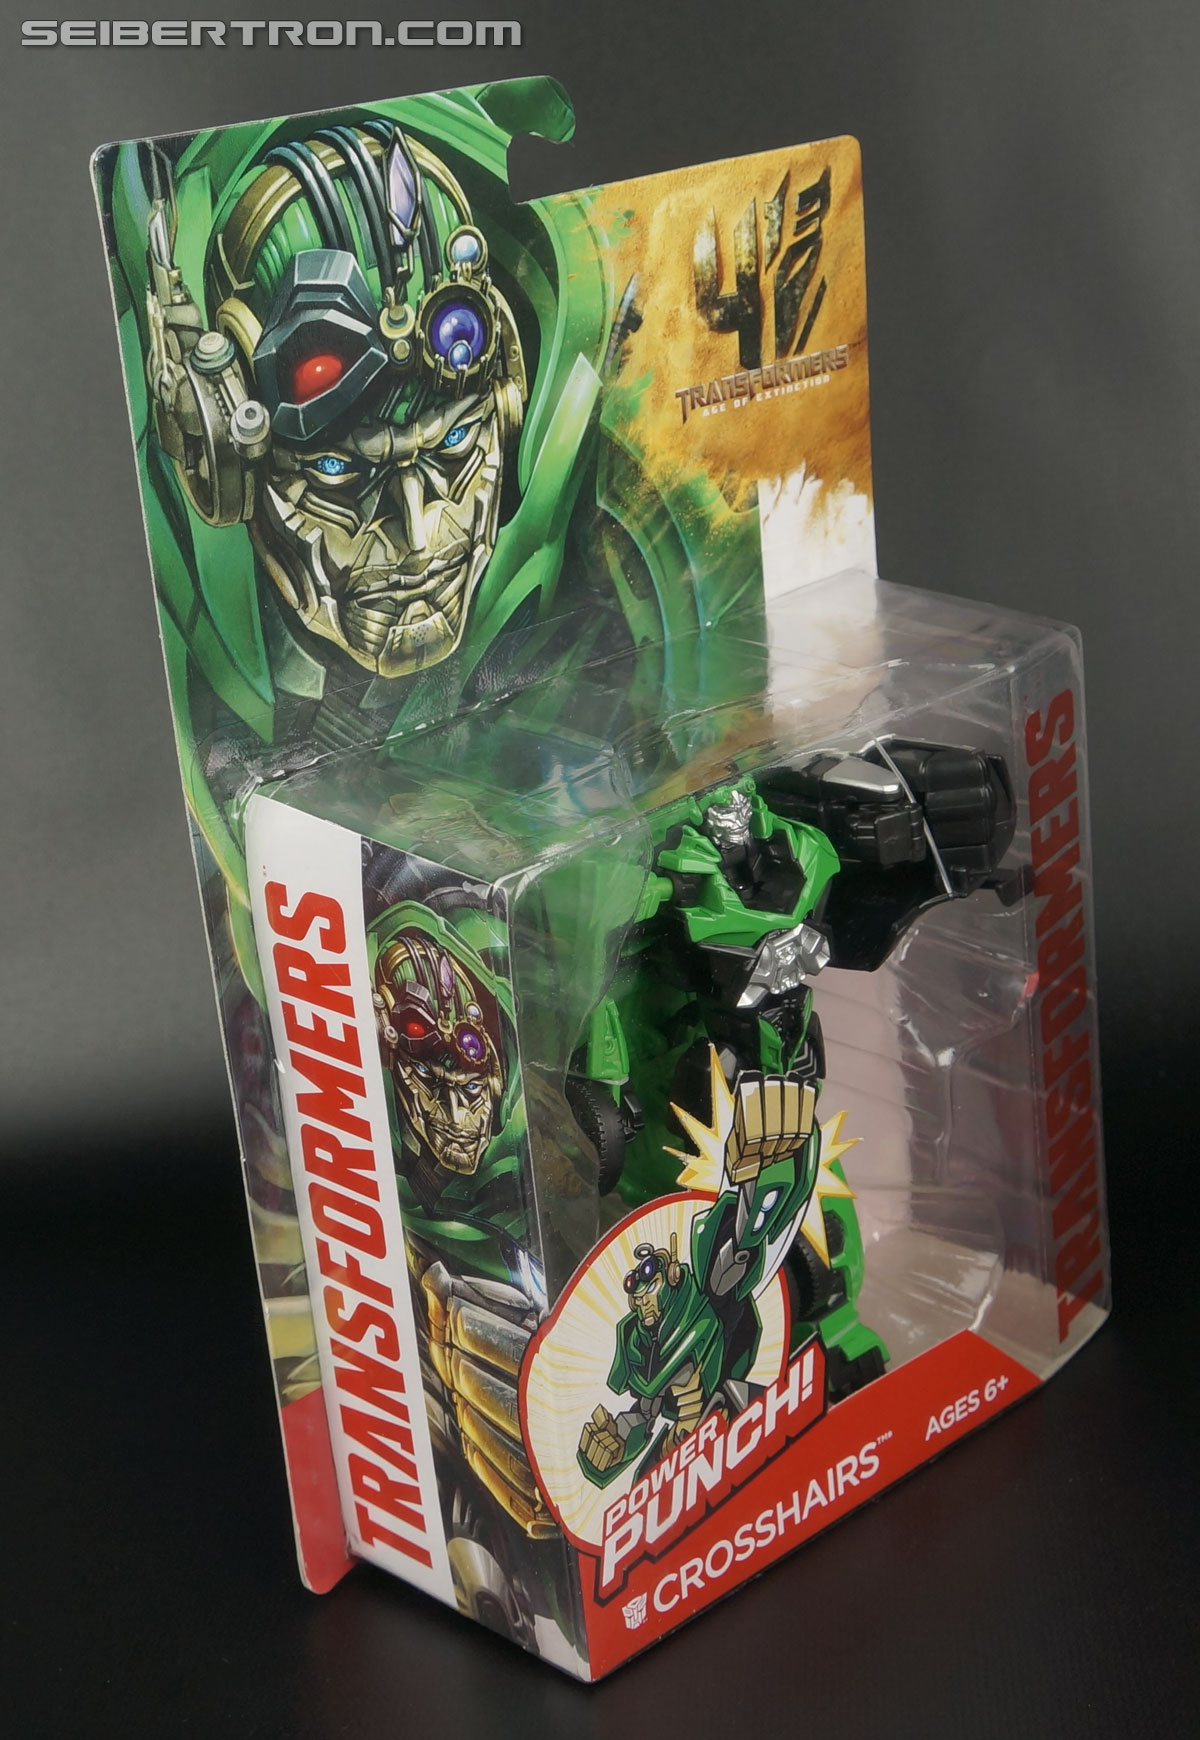 Transformers Age of Extinction: Robots In Disguise Power Punch Crosshairs (Image #5 of 77)